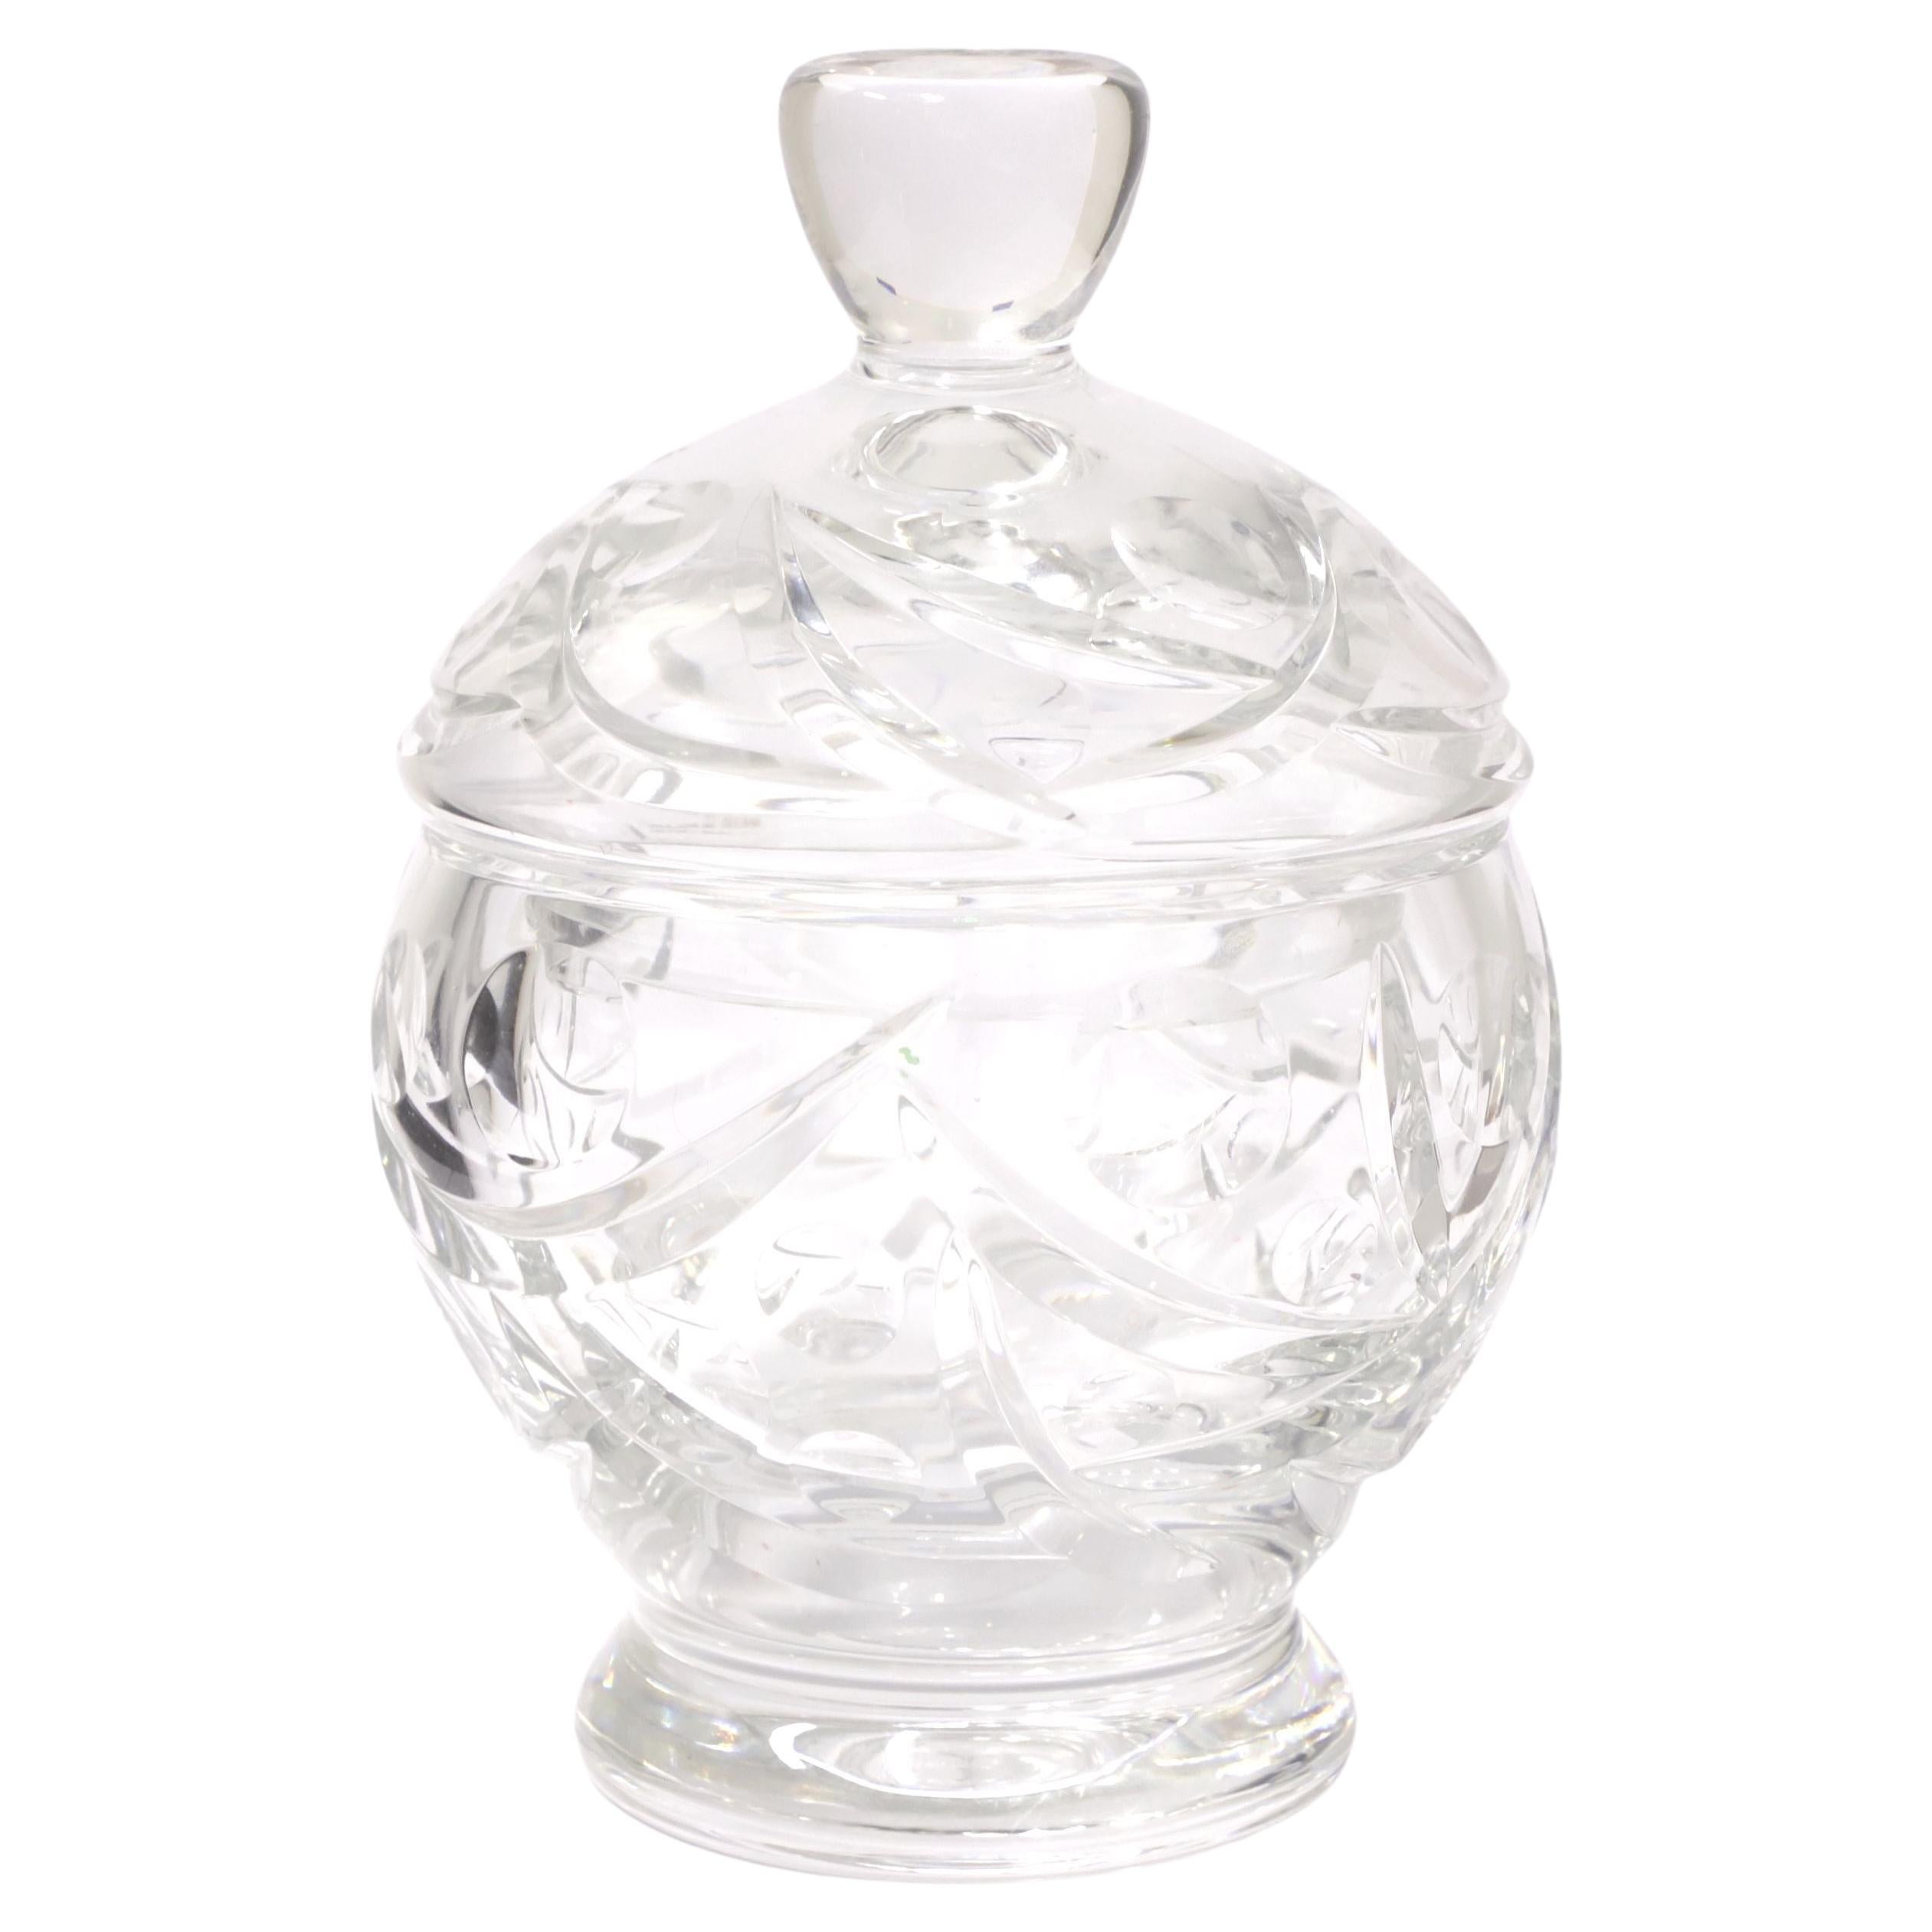 Mid 20th Century Crystal Candy Dish with Lid